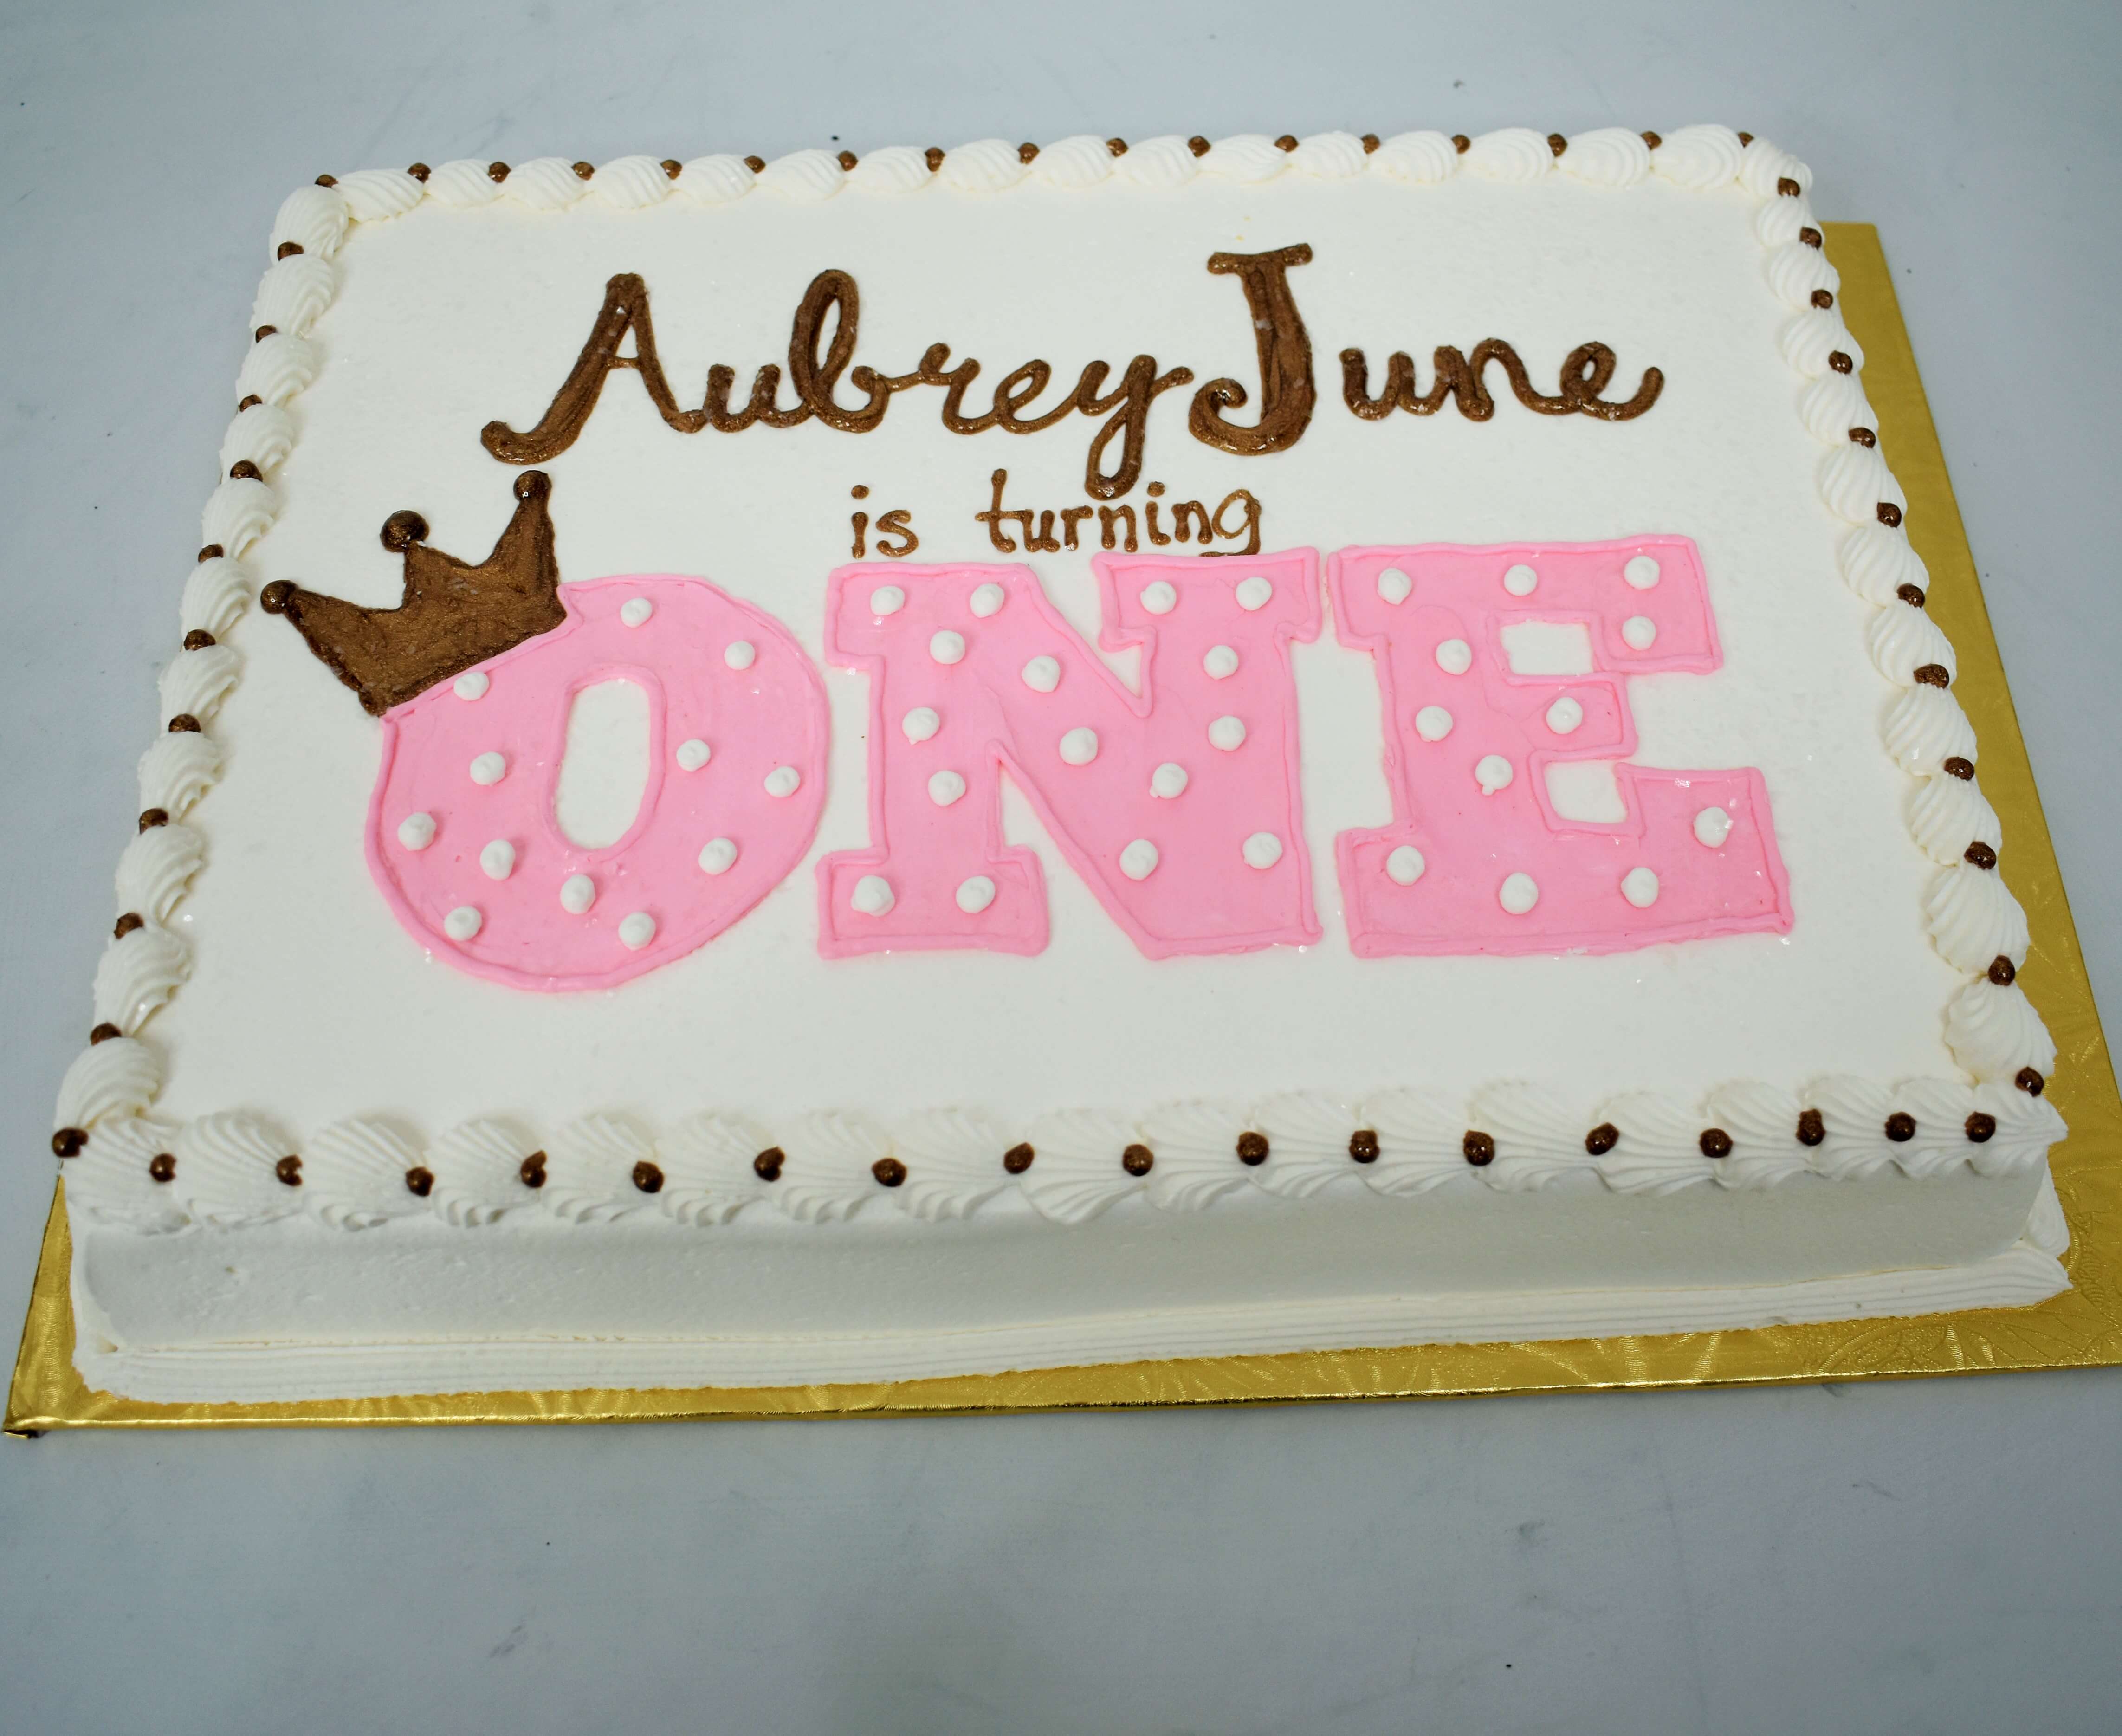 MaArthur's Bakery Custom Cake With Large One in Pink with Polka Dots and Gold Crown